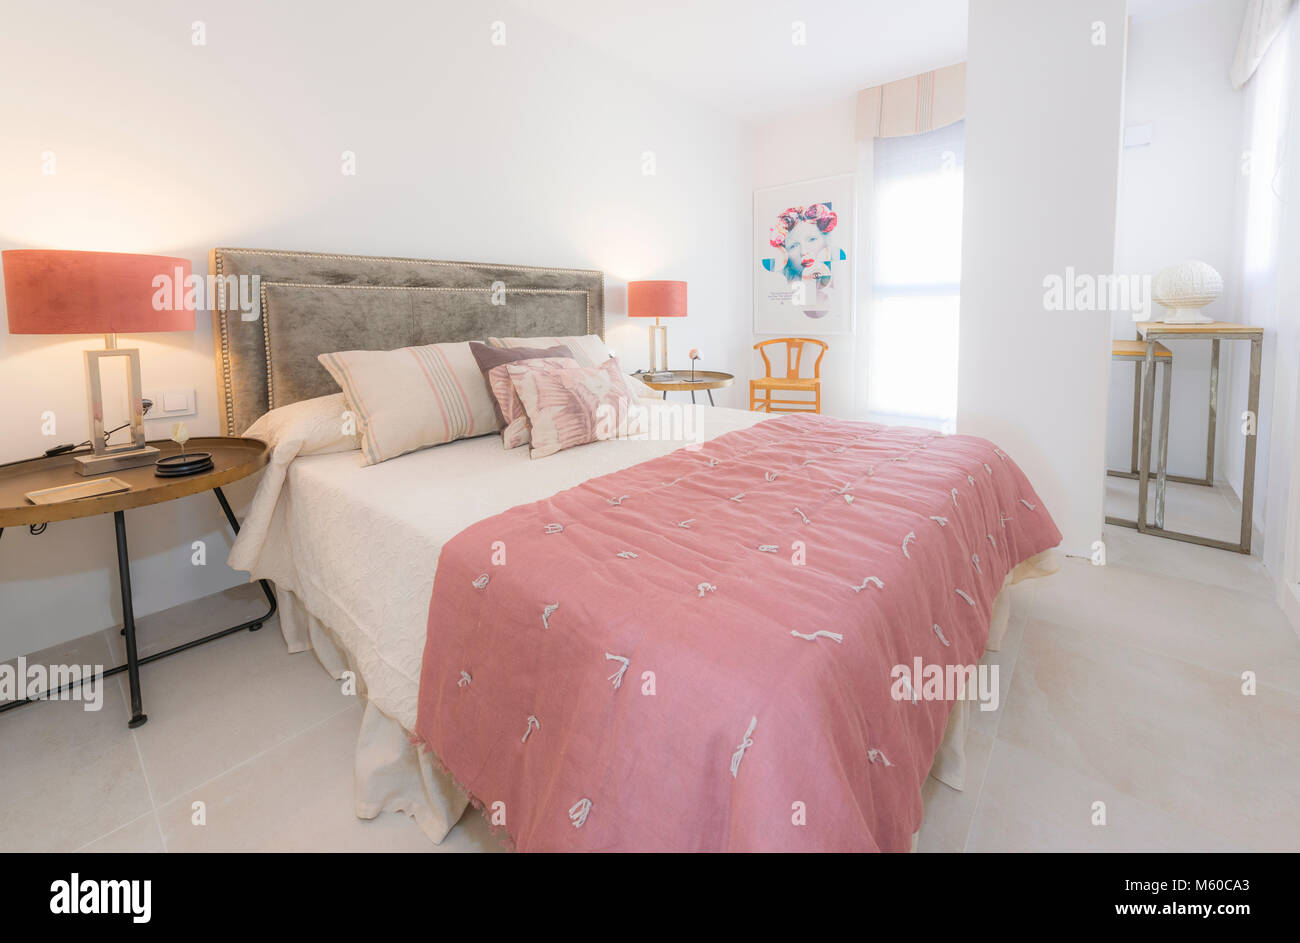 Bedroom, Indoor real estate. Malaga, Andalusia, Spain. Stock Photo